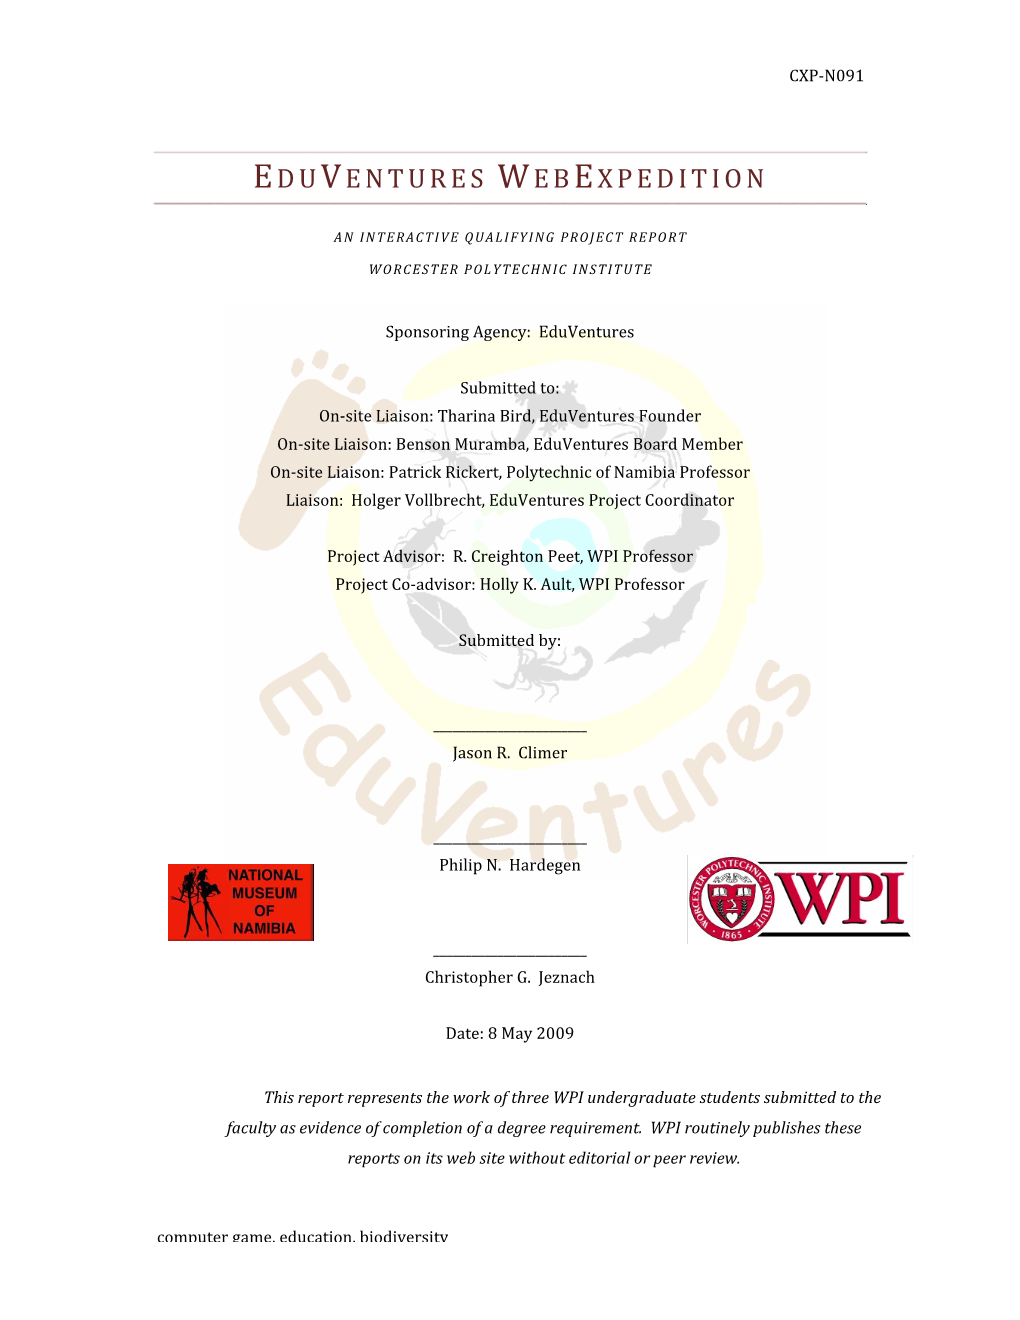 Eduventures Webexpedition Project